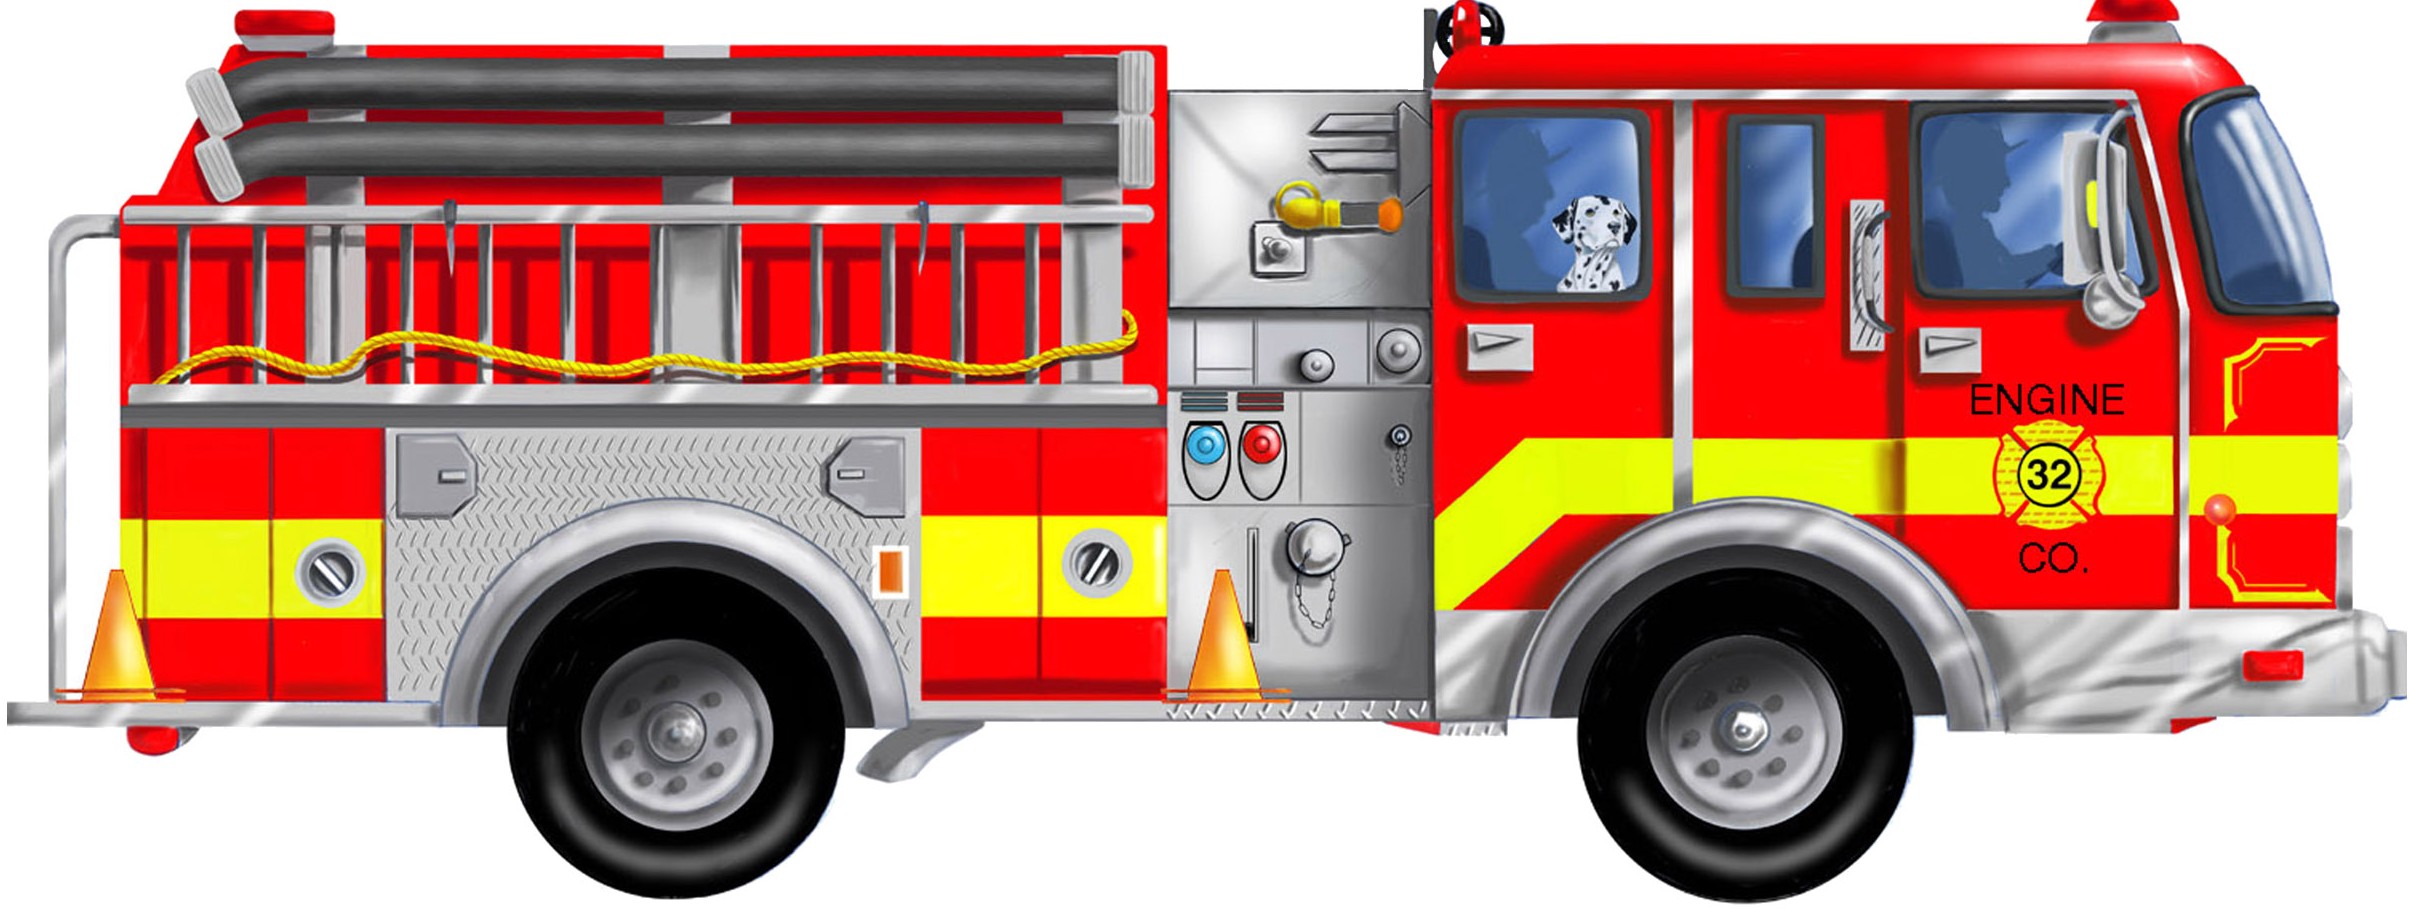 Fire truck clip art to download 2